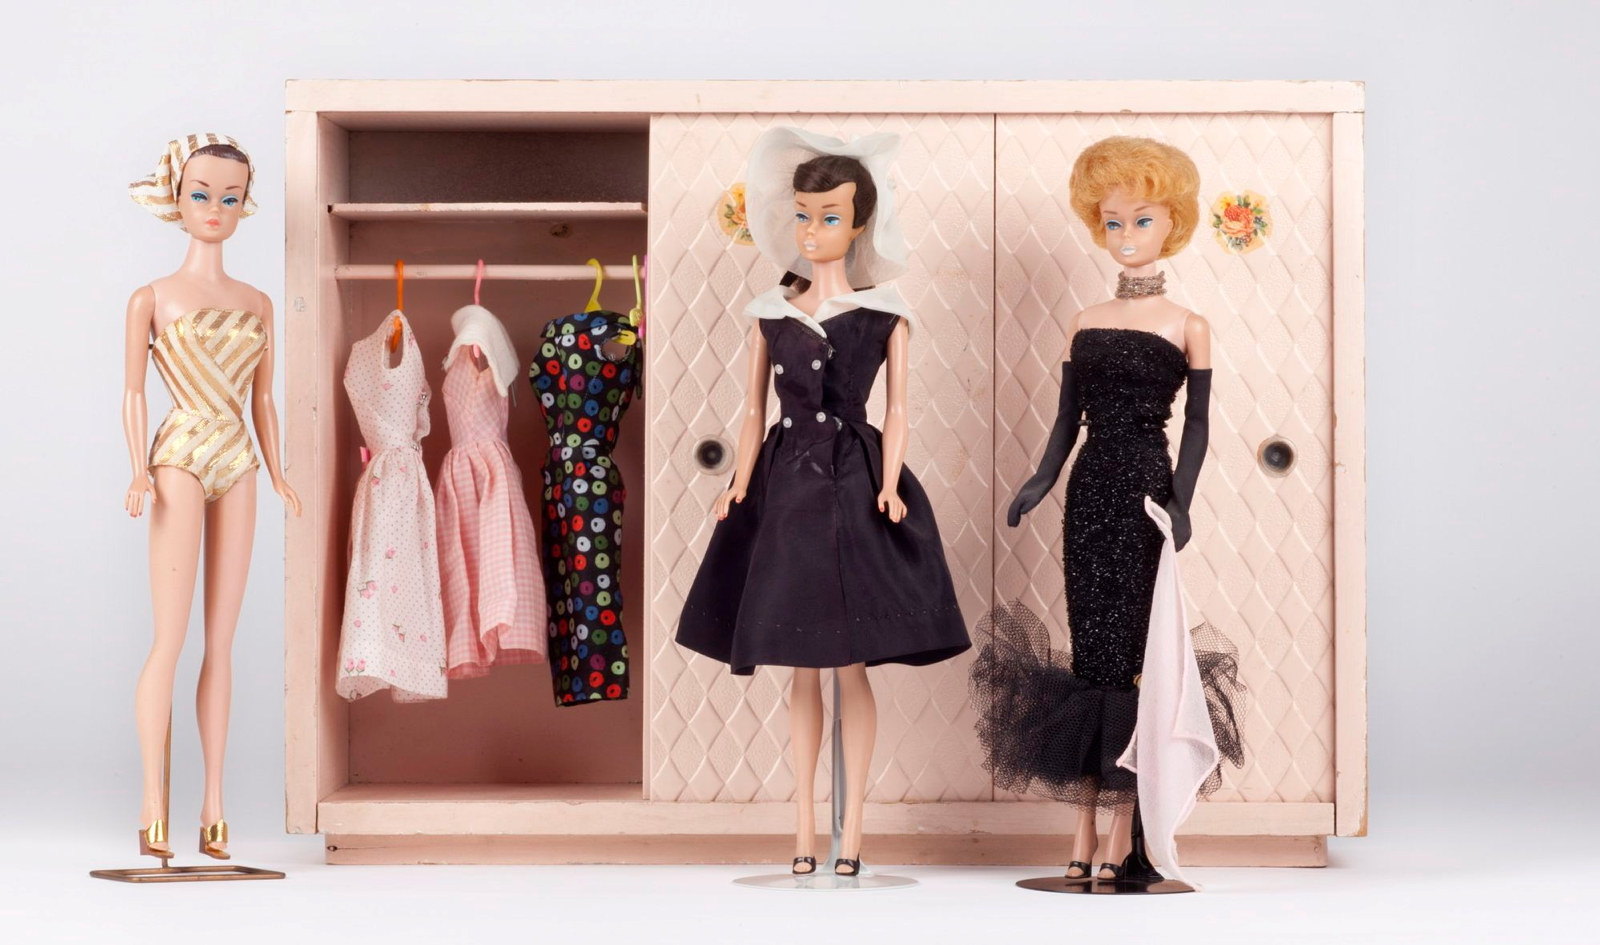 This is a colour photograph of three barbie dolls in various costumes standing in front of a 1950s style pink miniature wardrobe